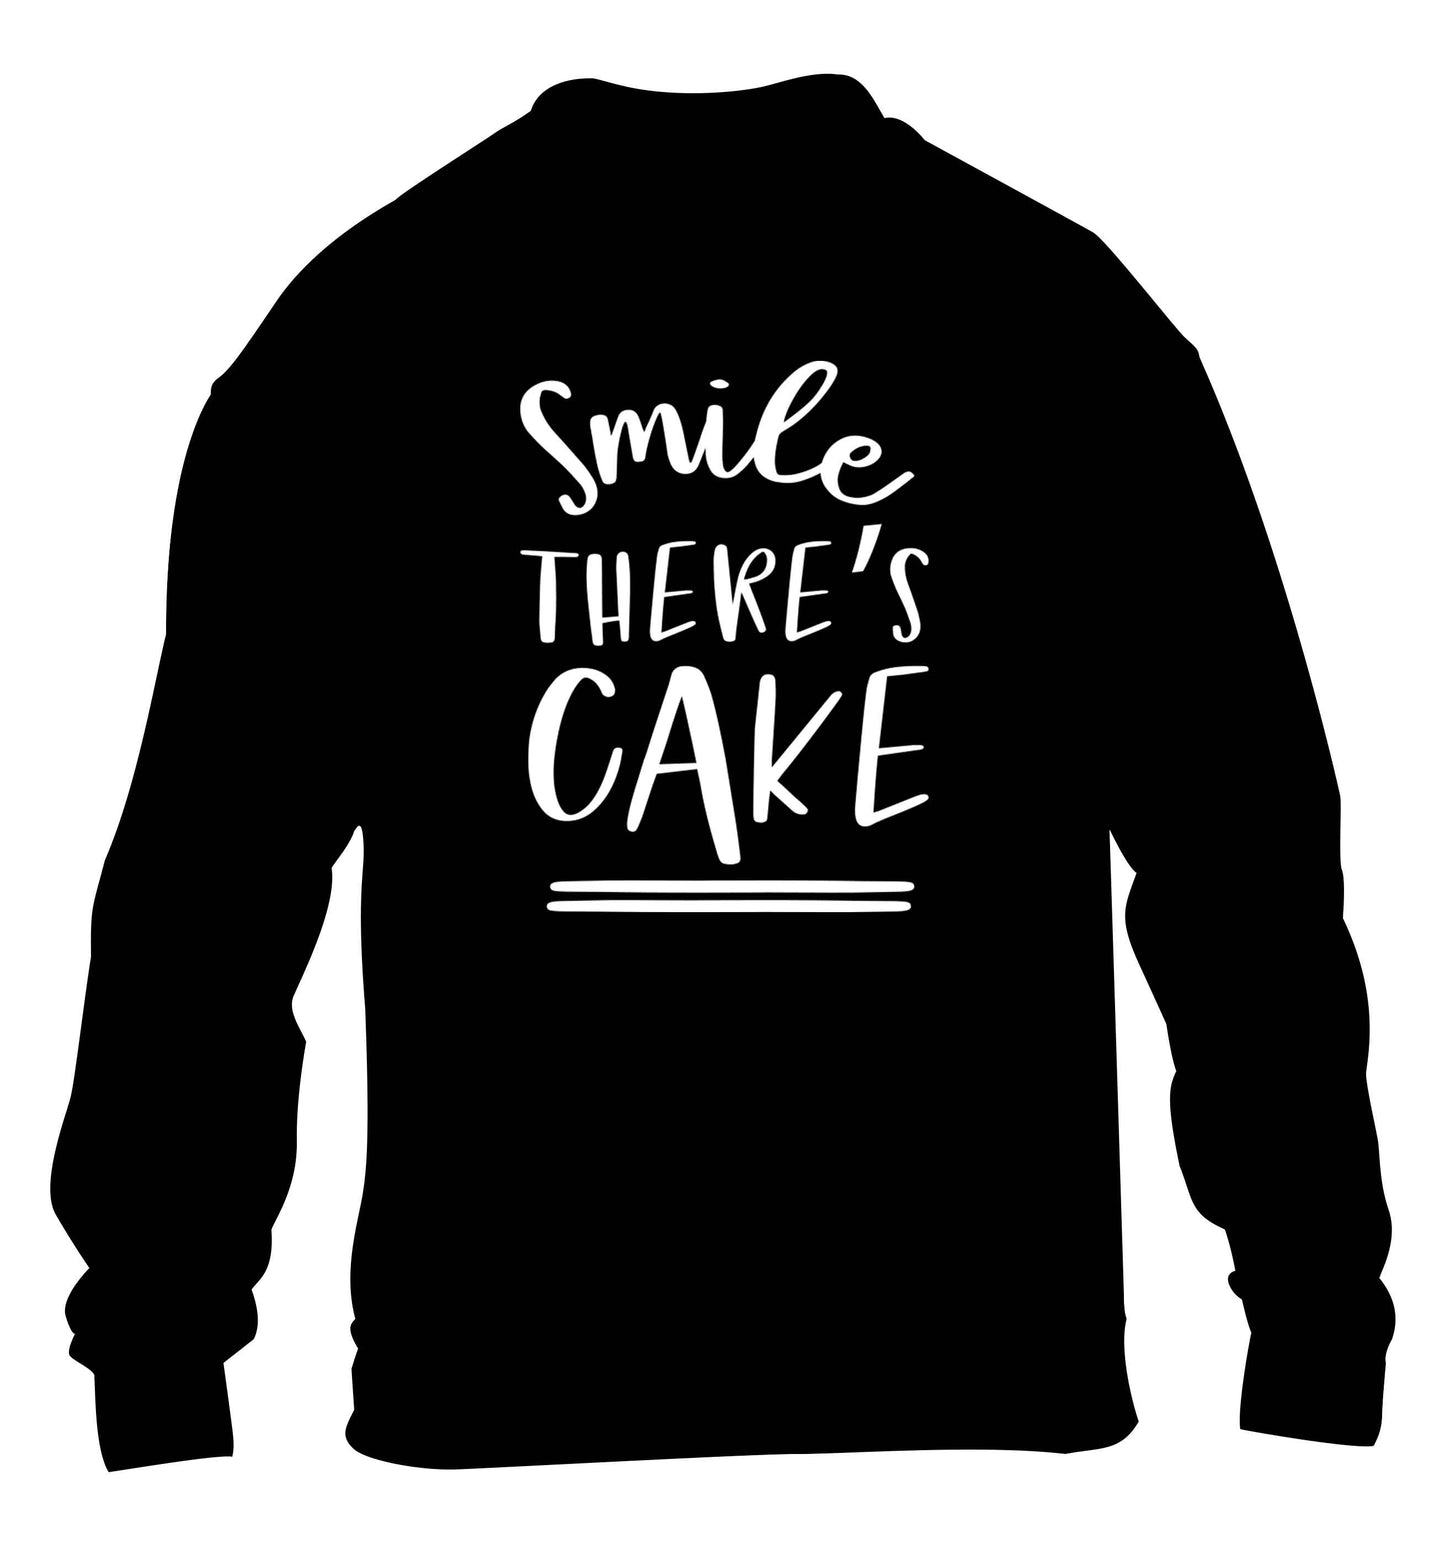 Smile there's cake children's black sweater 12-13 Years